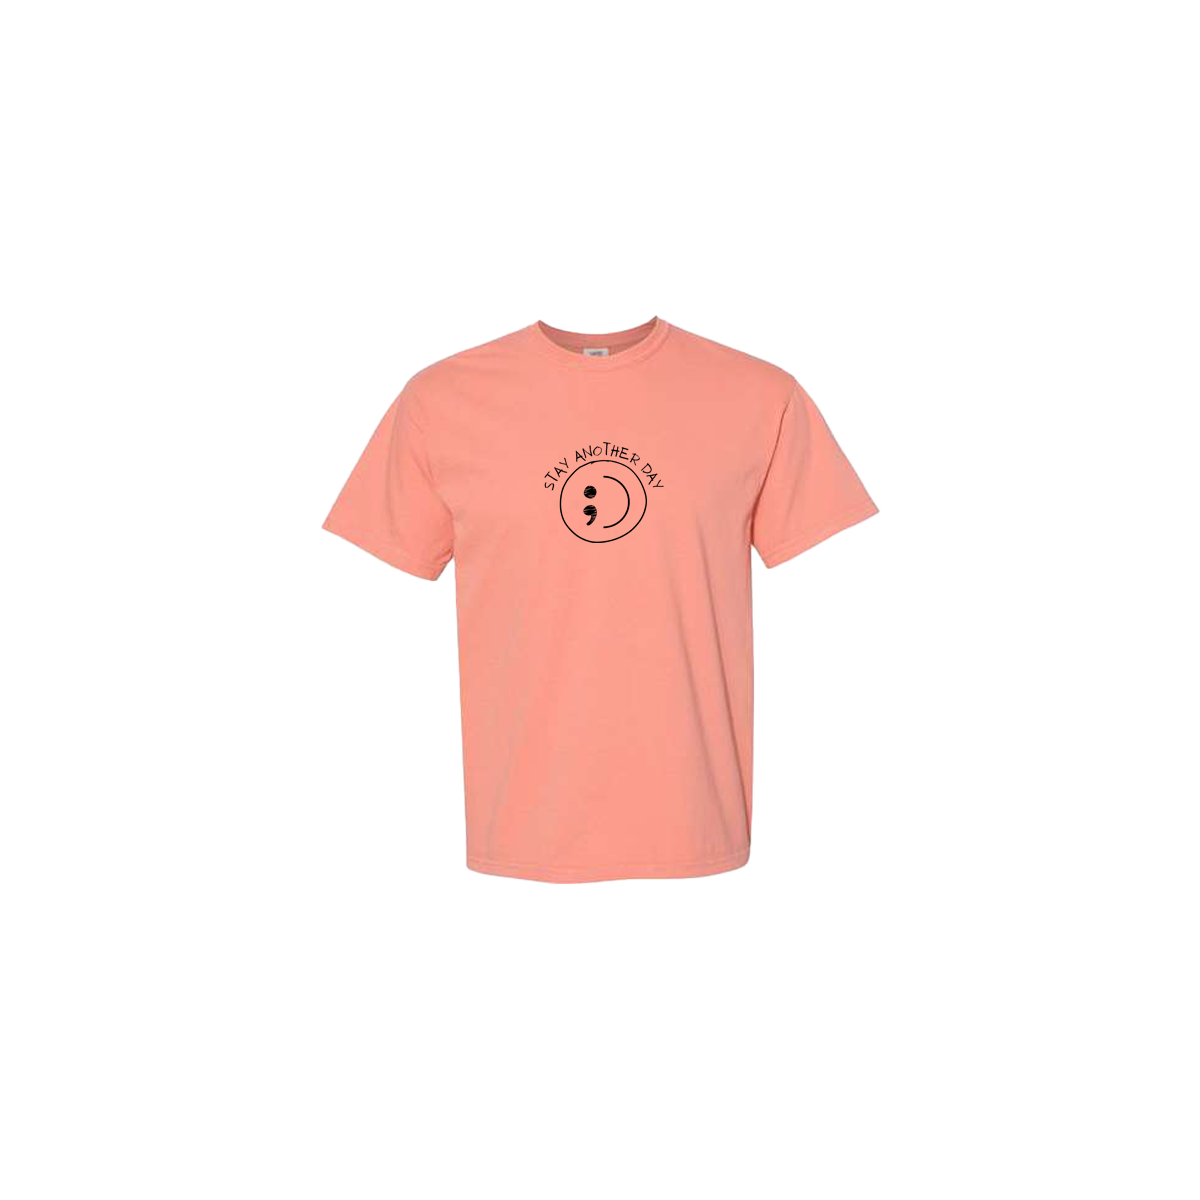 Stay Another Day Smiley Face Embroidered Coral Tshirt - Mental Health Awareness Clothing